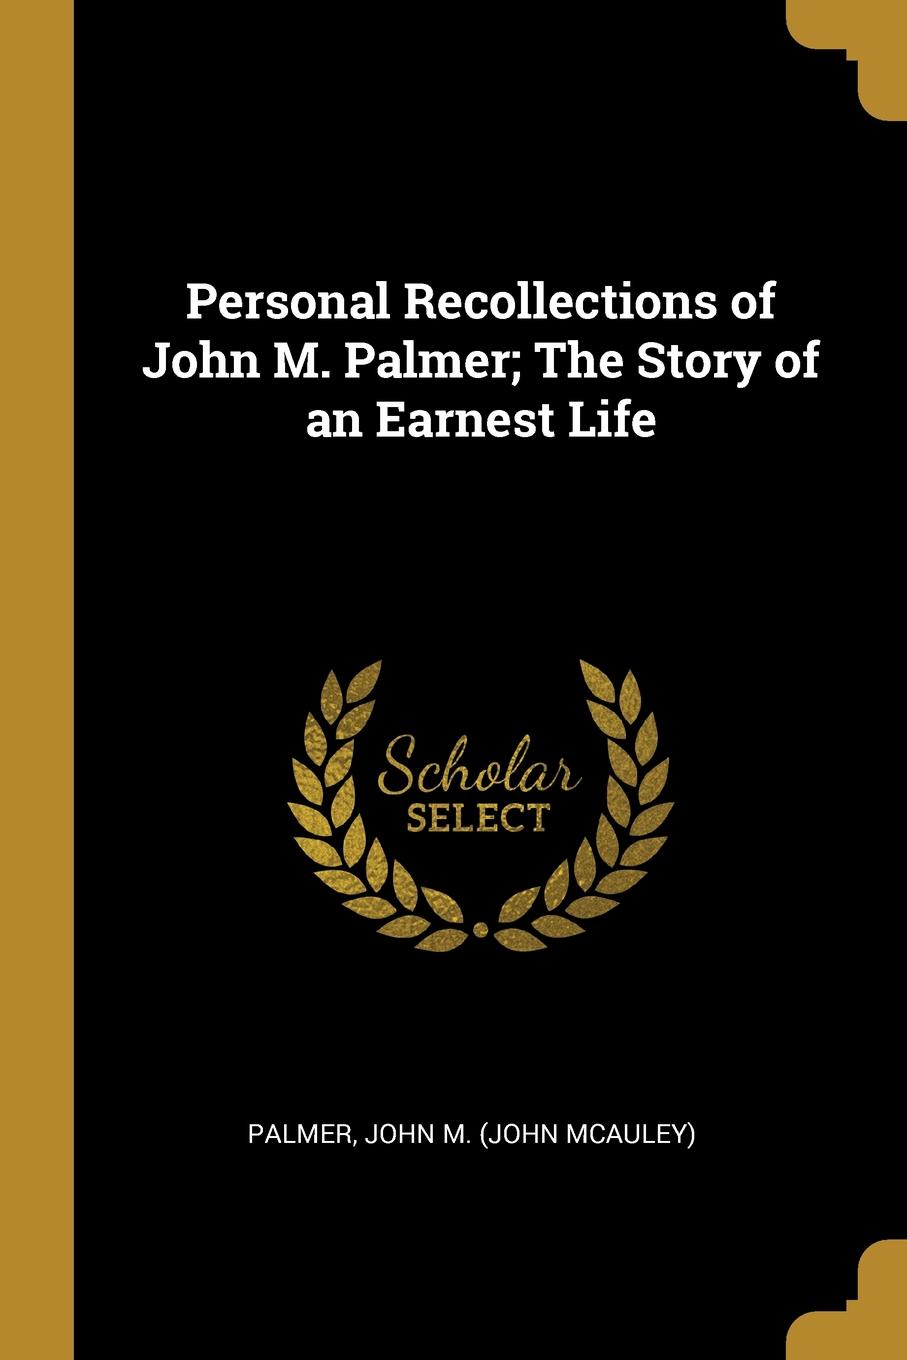 Personal Recollections of John M. Palmer; The Story of an Earnest Life